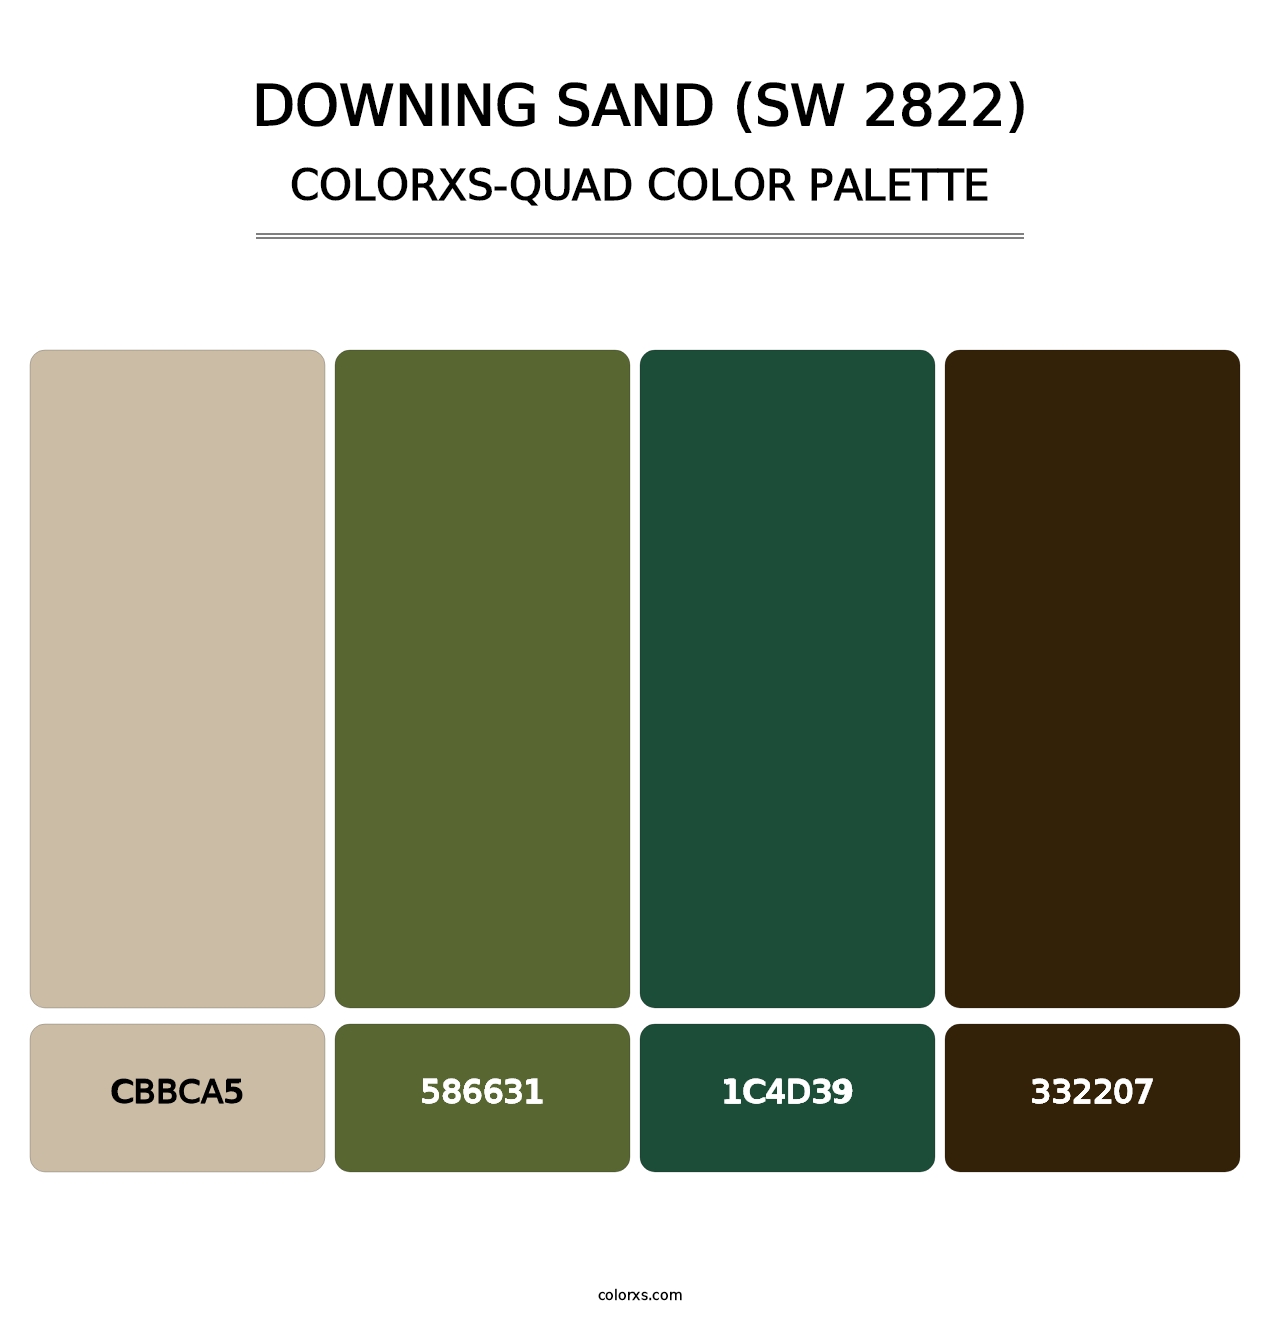 Downing Sand (SW 2822) - Colorxs Quad Palette